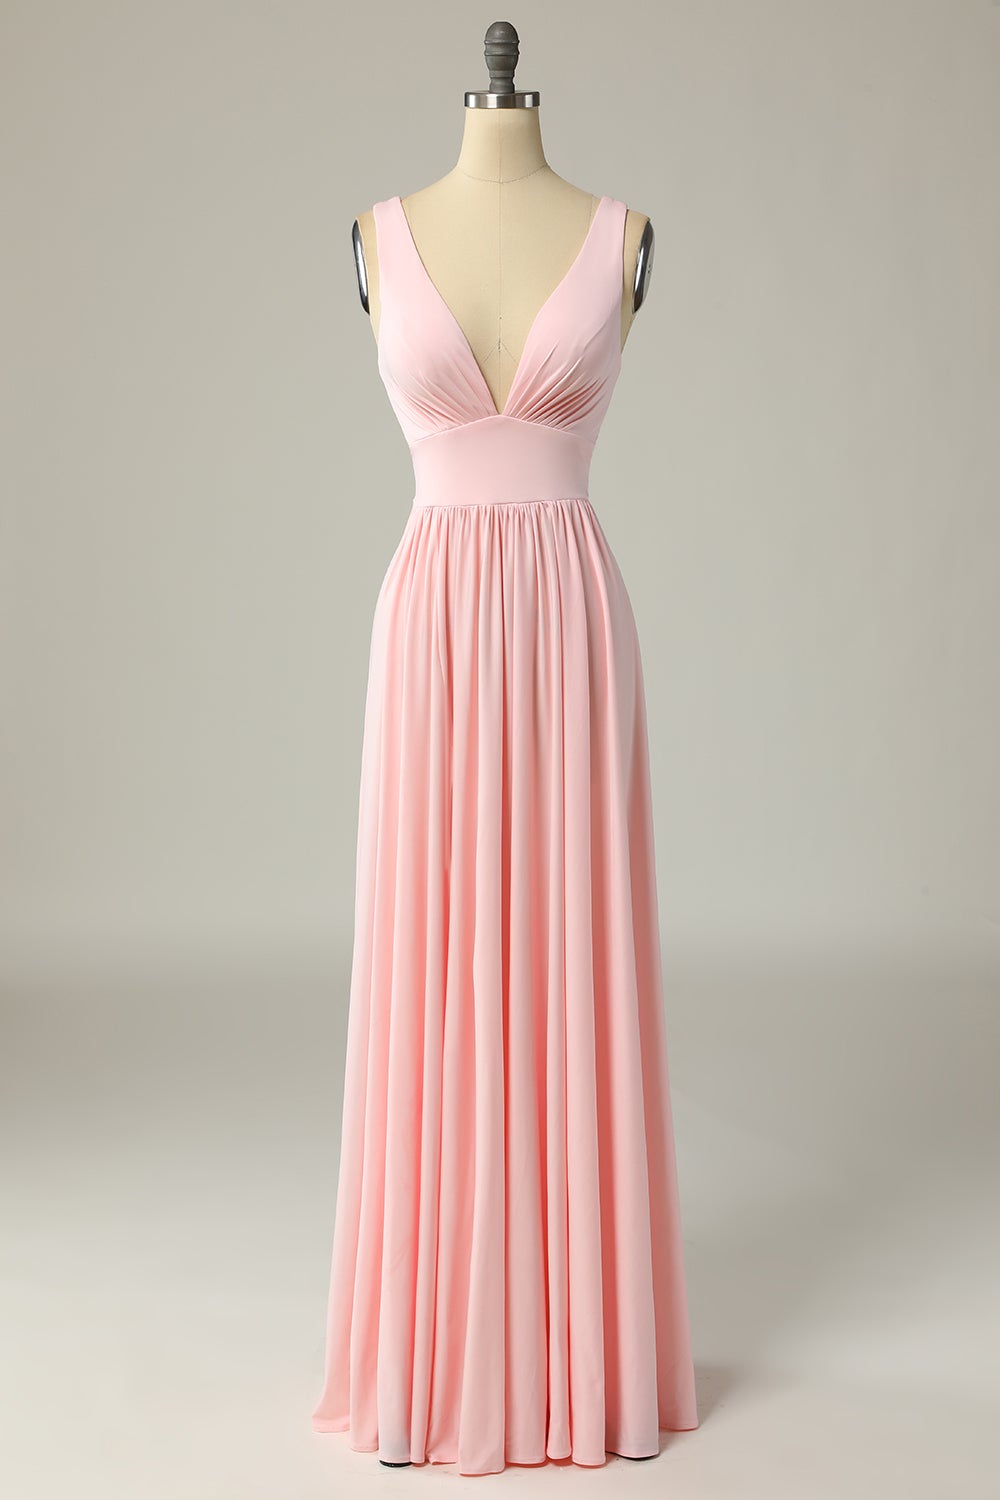 Classic Pink Long Corset Prom Dress with Split Front Gowns, Prom Dressed Long